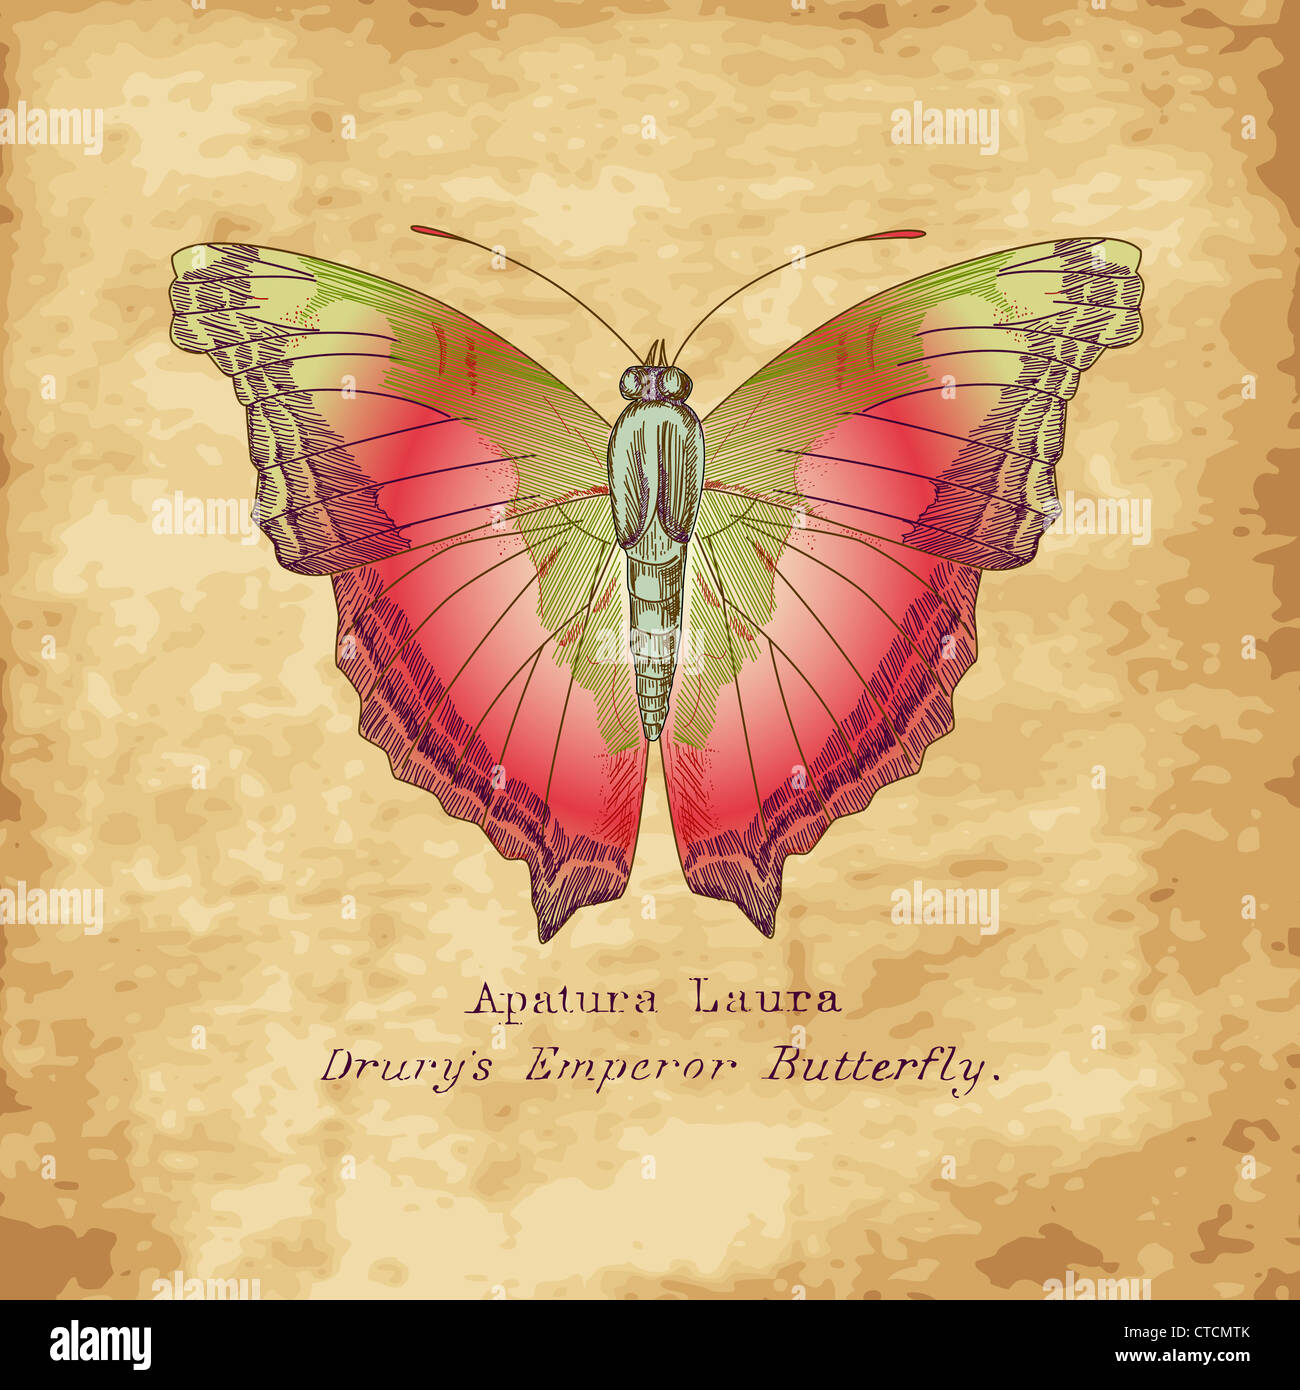 Hand drawn butterfly in vintage style Stock Photo